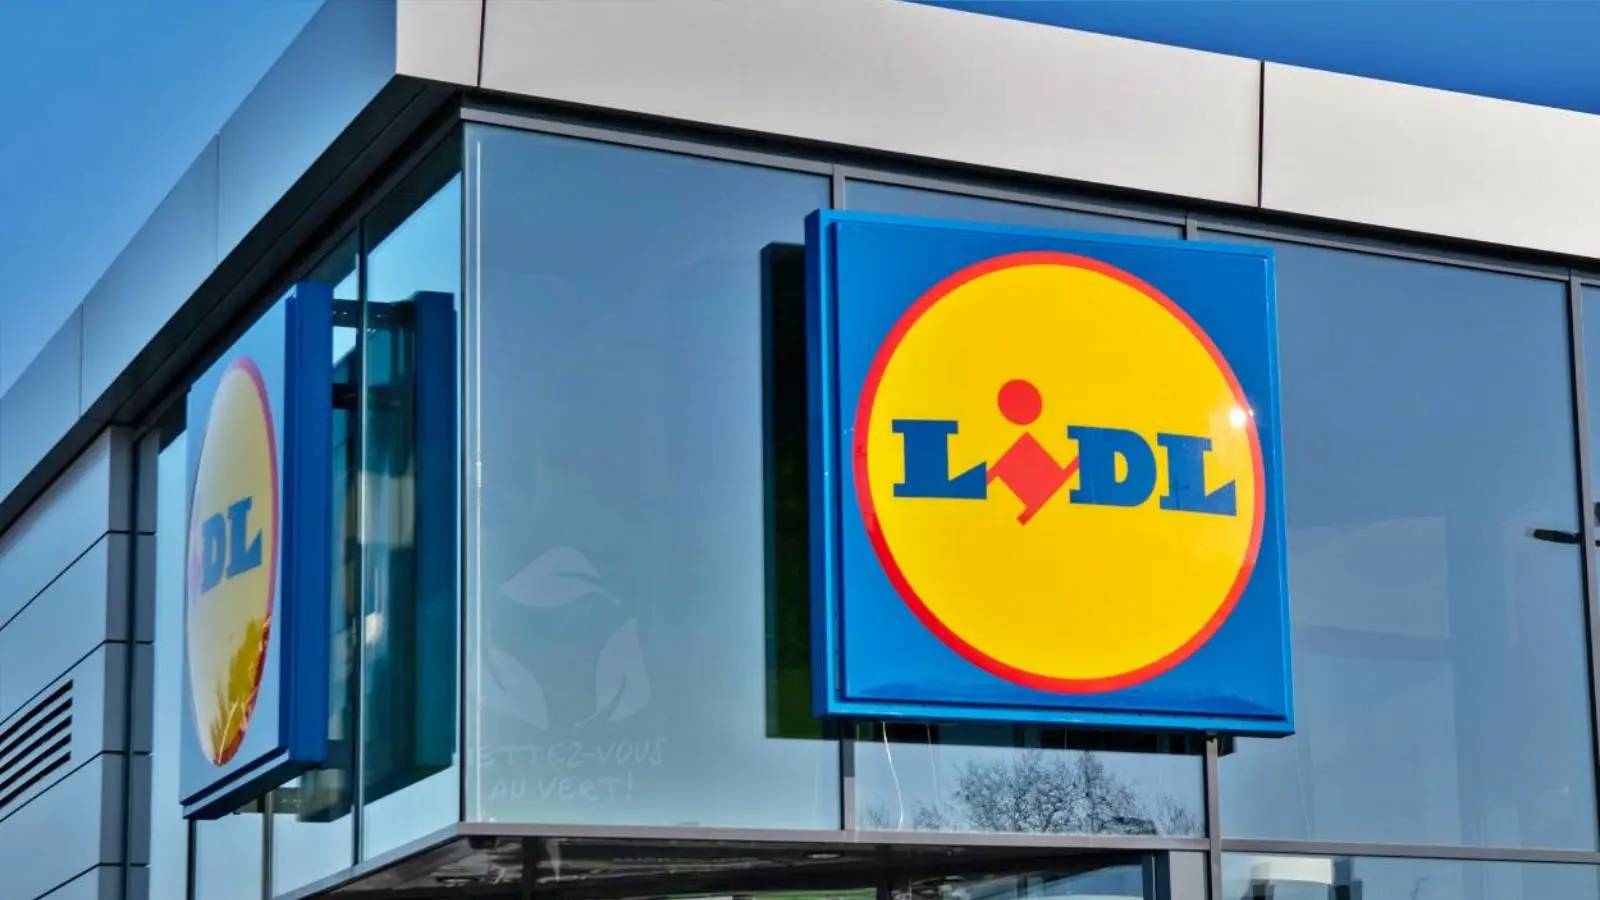 LIDL Romania Official Provisions LAST MINUTE Offer FREE to Romanian Customers